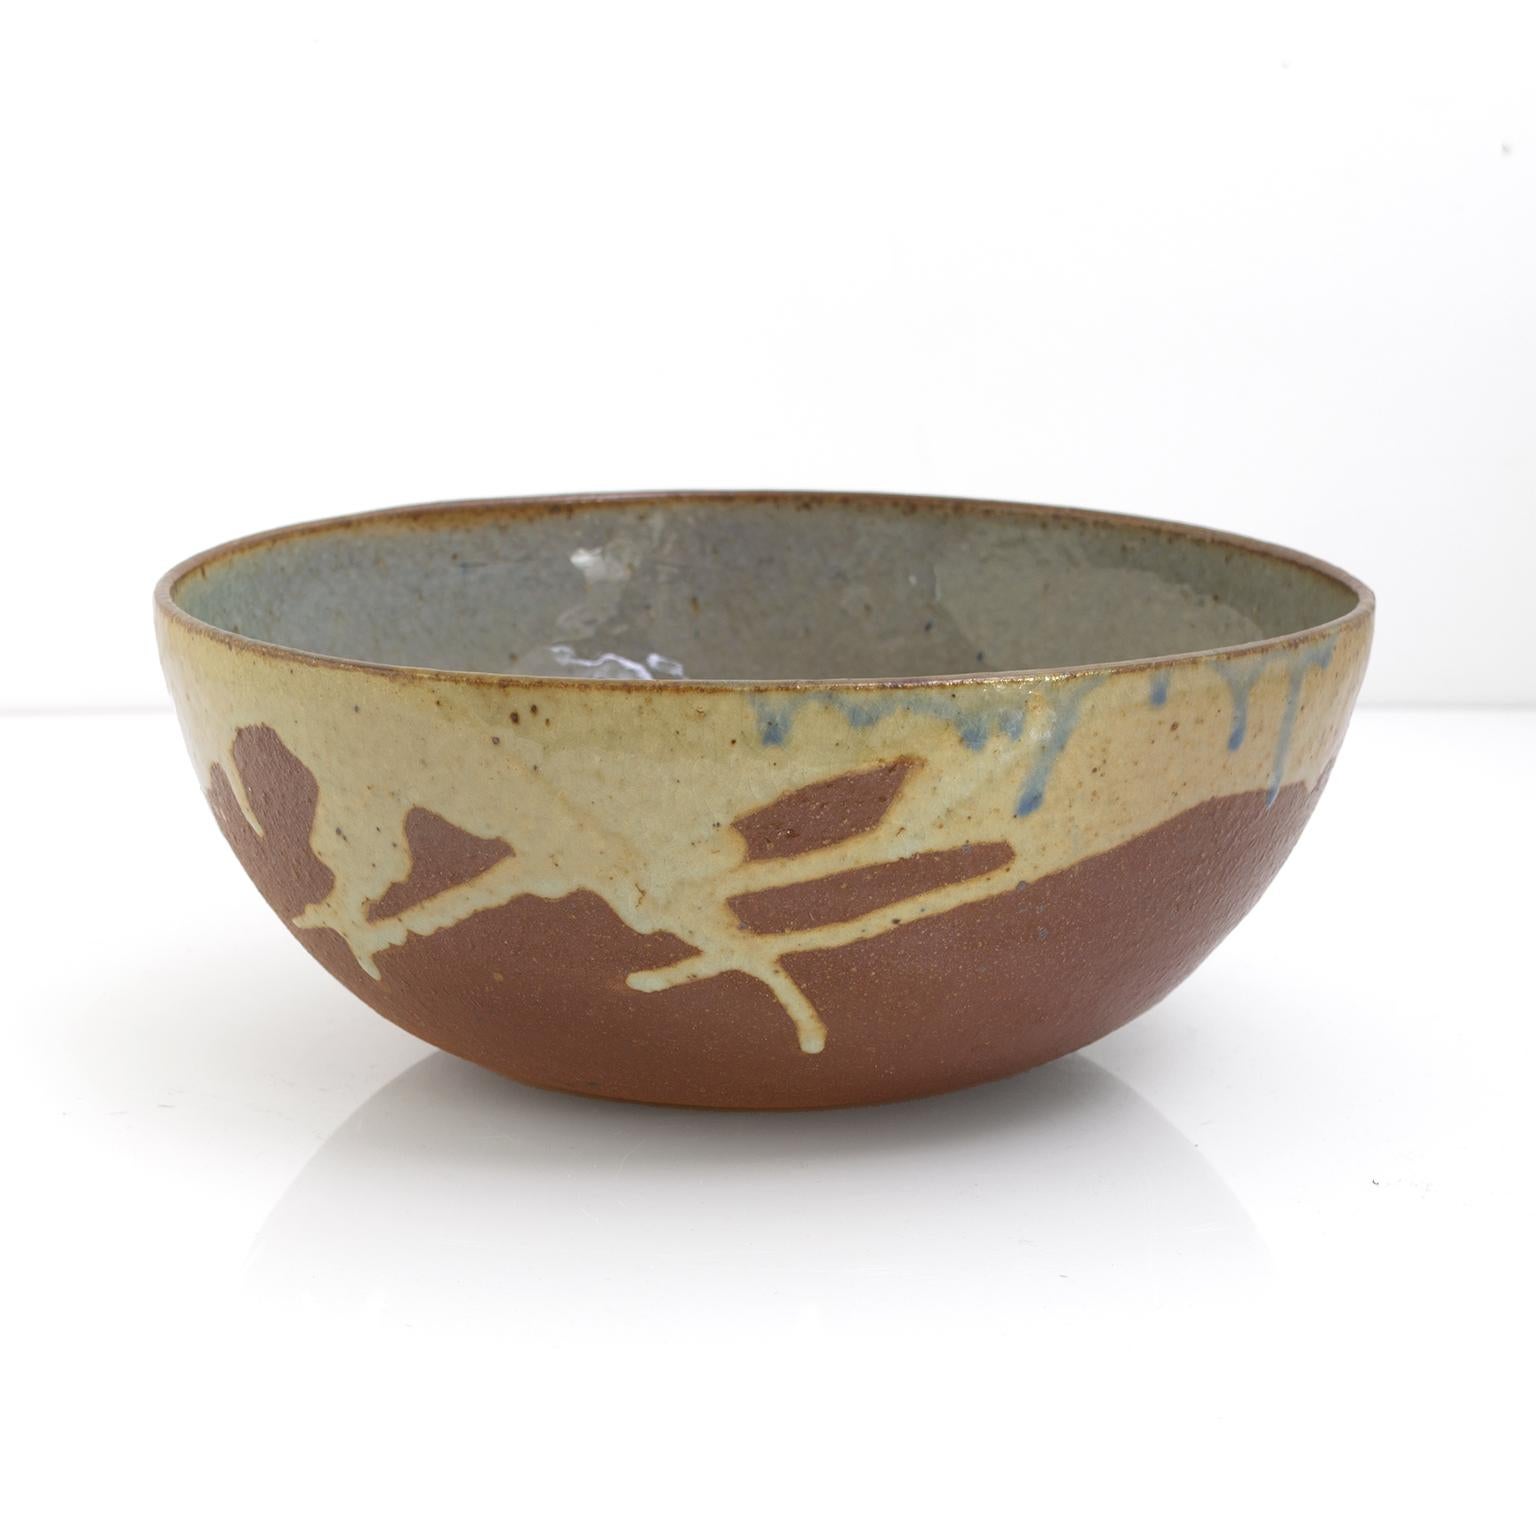 Made by Hungarian born Gustav and his Swedish wife Ulla, hand thrown and glazed ceramic bowl, dated 1976. These artists are know for their sublime forms and expressive glaze techniques. 

Measures: Diameter: 10.5“ Height: 4.5“.